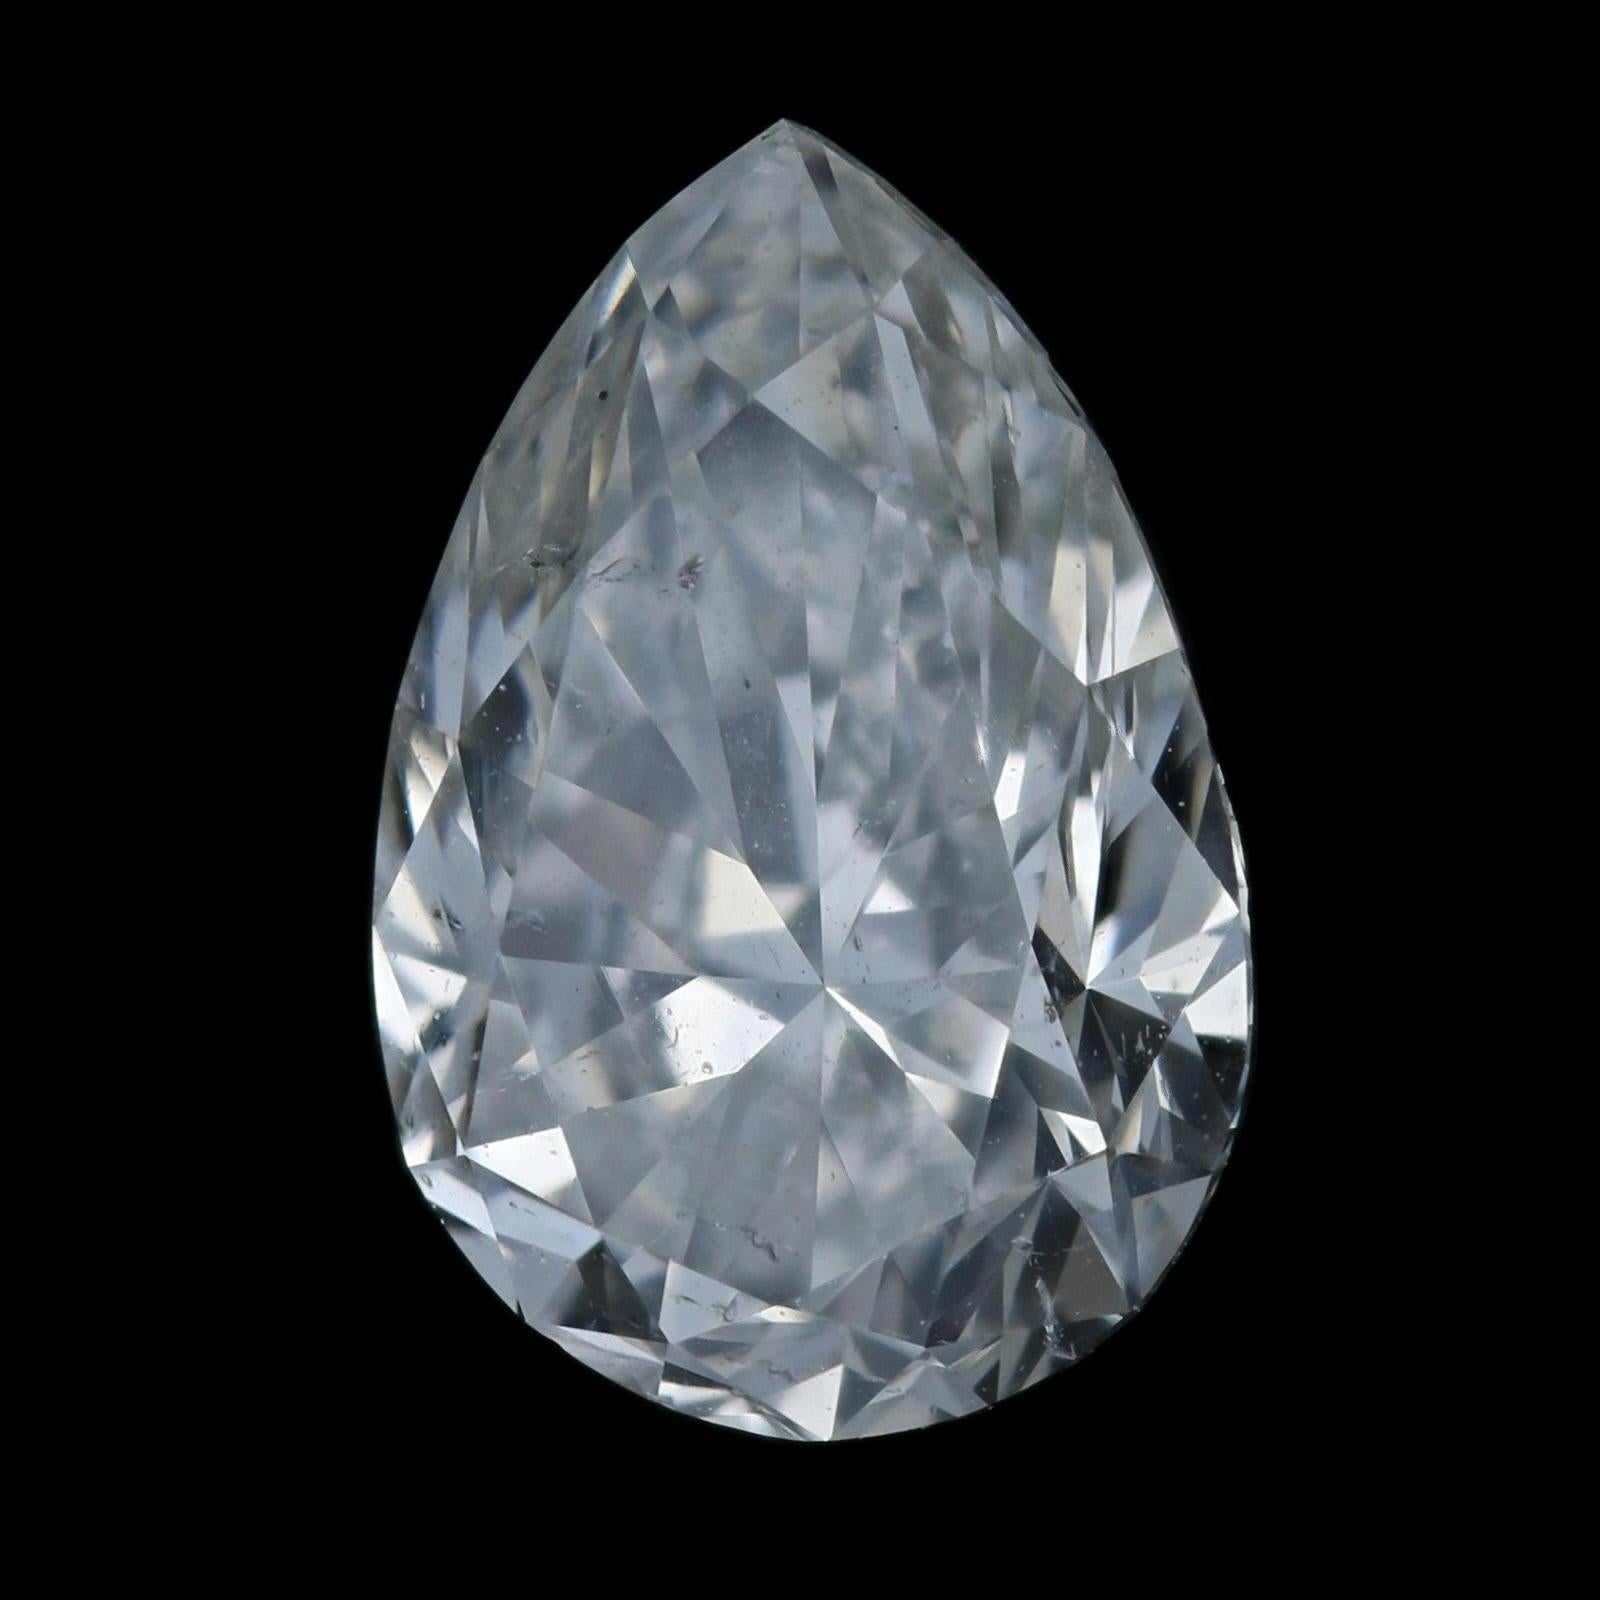 Weight: 1.20ct
Cut: Pear
Color: H
Clarity: SI2
Dimensions (mm): 8.48 x 5.72 x 3.73 

GIA Report Number: 5211189634 

Condition: New  

Please check out the enlarged pictures.

Thank you for taking the time to read our description. If you have any